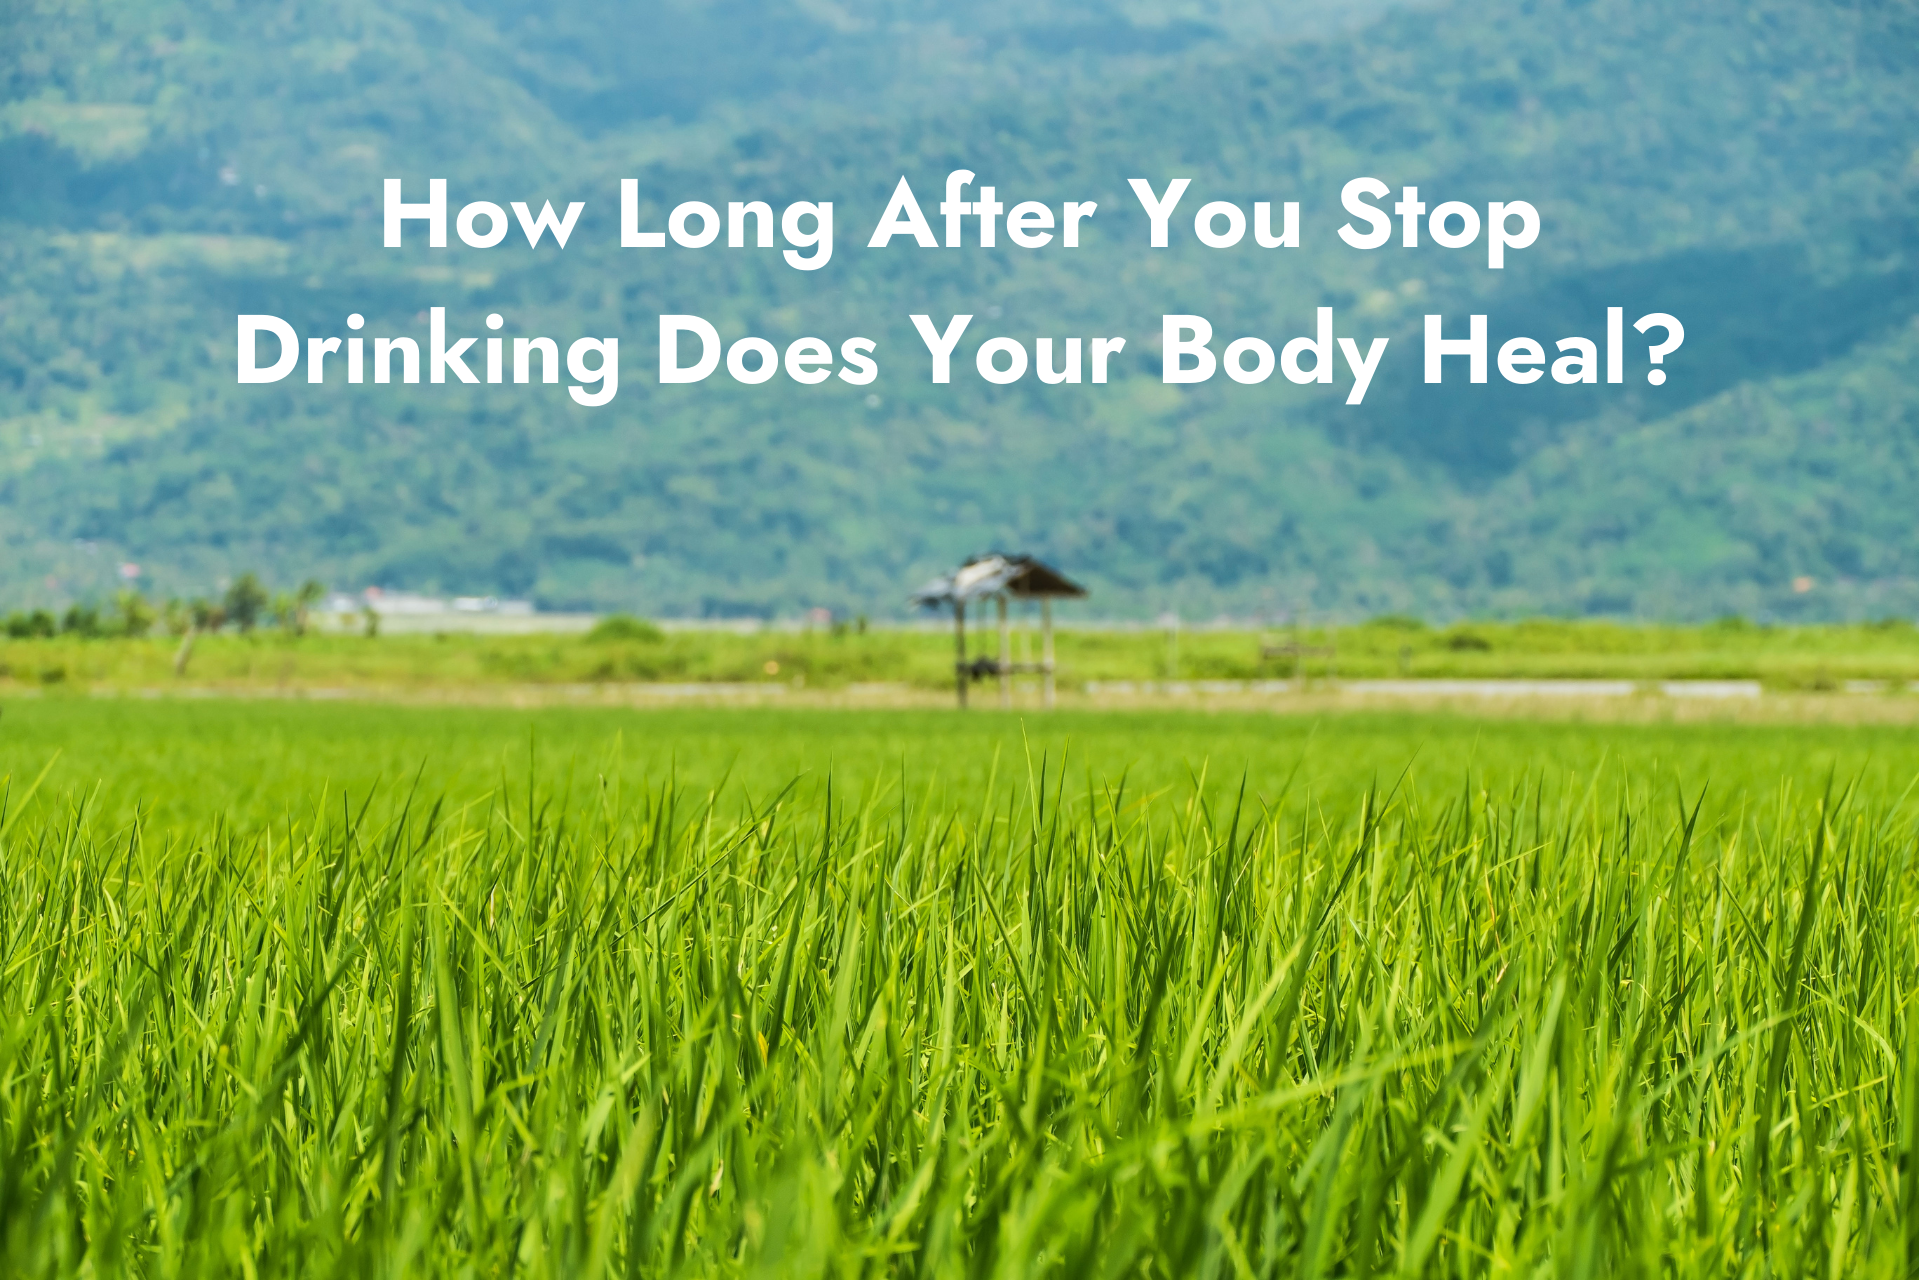 How Long After You Stop Drinking Does Your Body Heal?